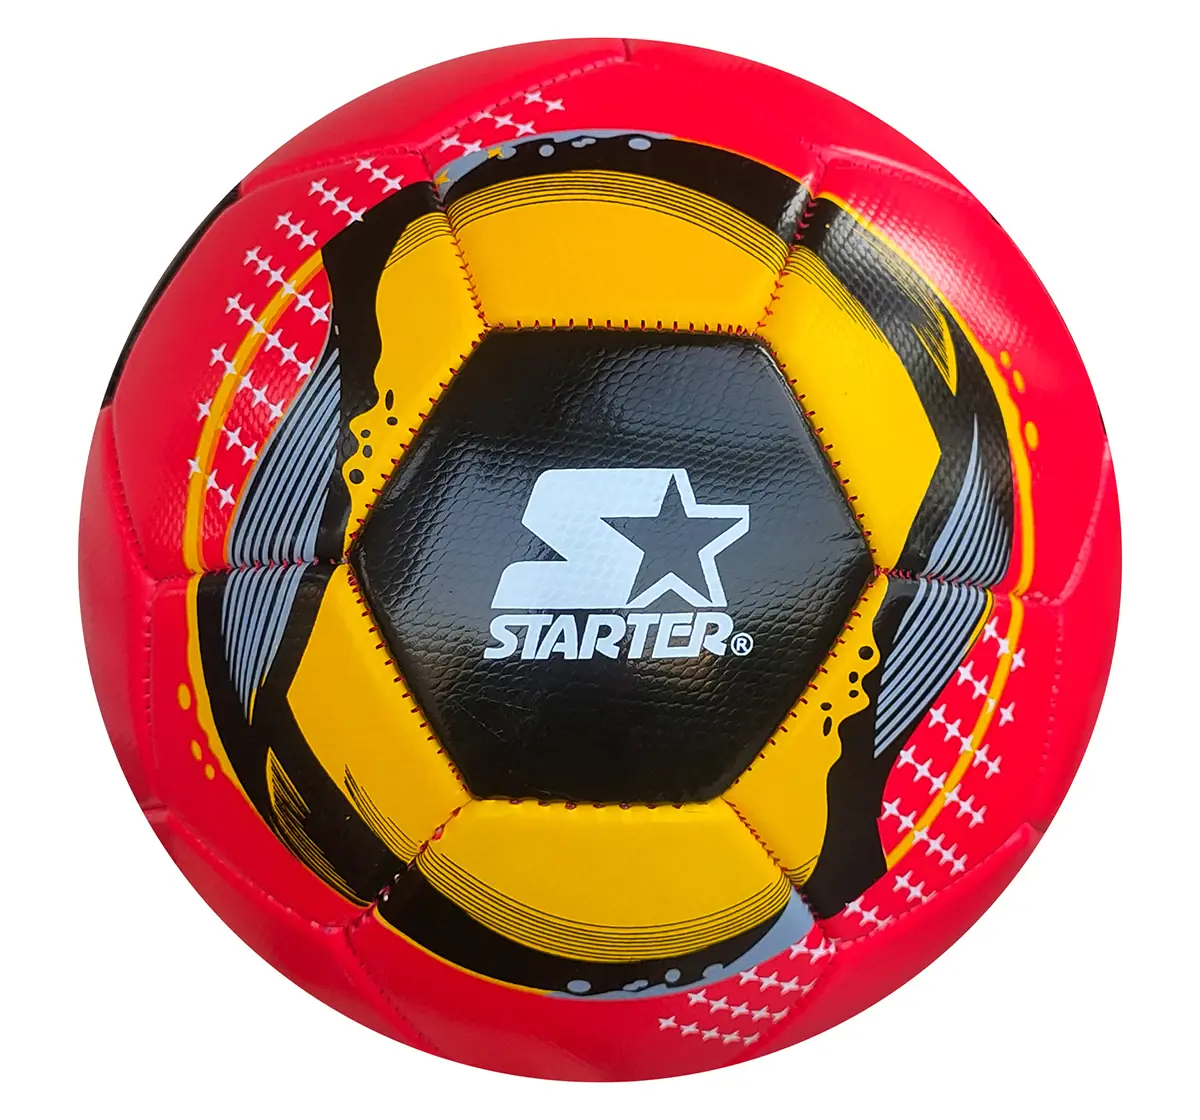 Starter Football Size 5 Red 8Y+